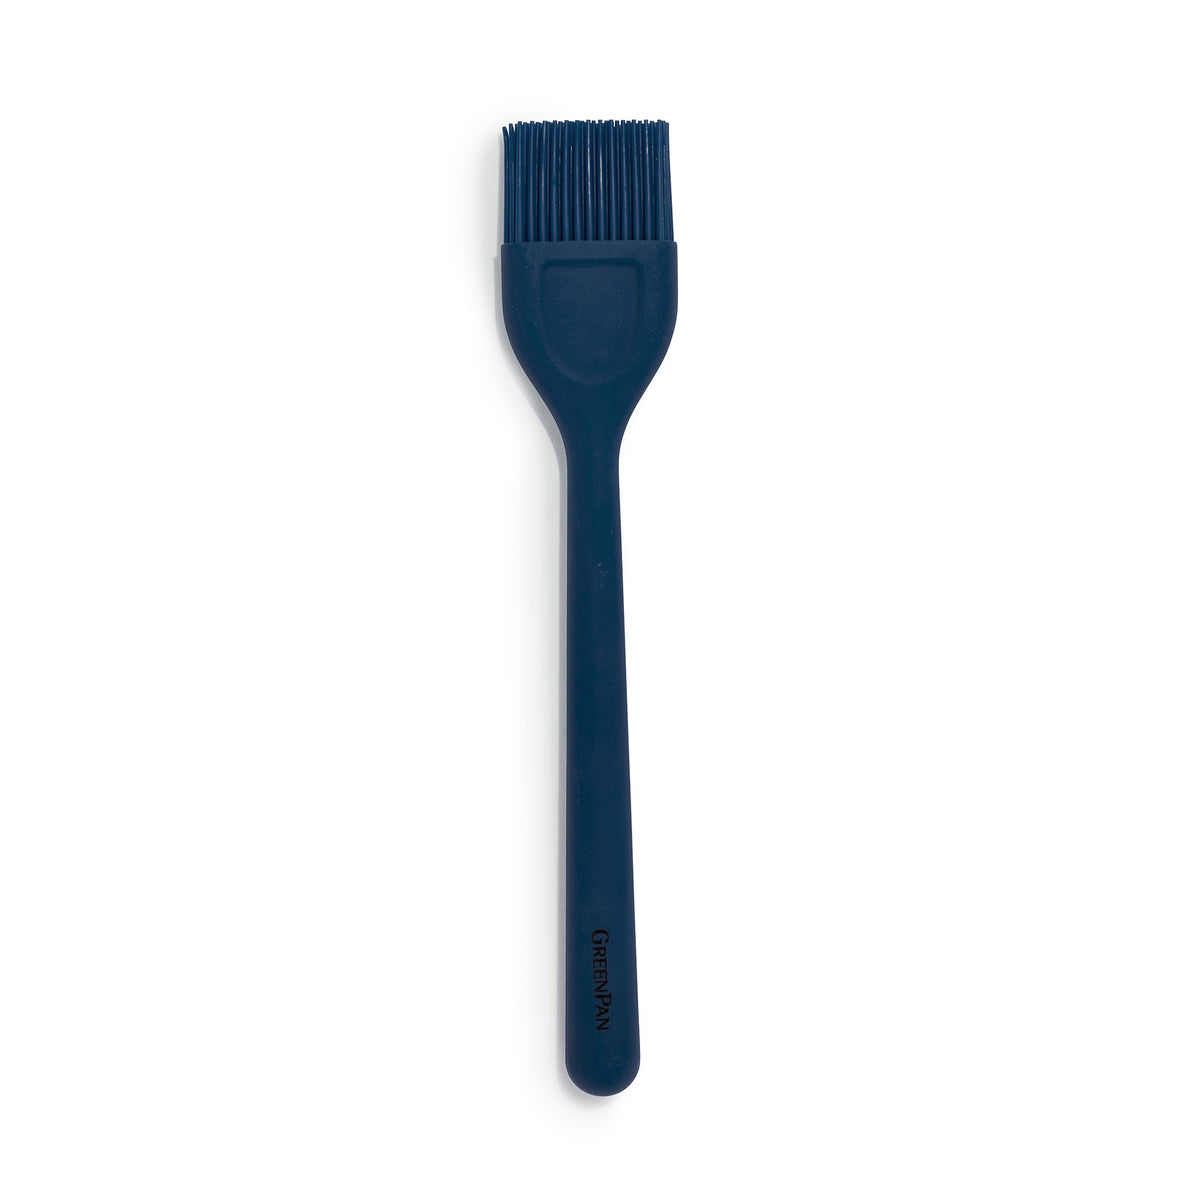 Celebrate It Silicone Basting Brush - Teal - 10.98 x 1.57 in